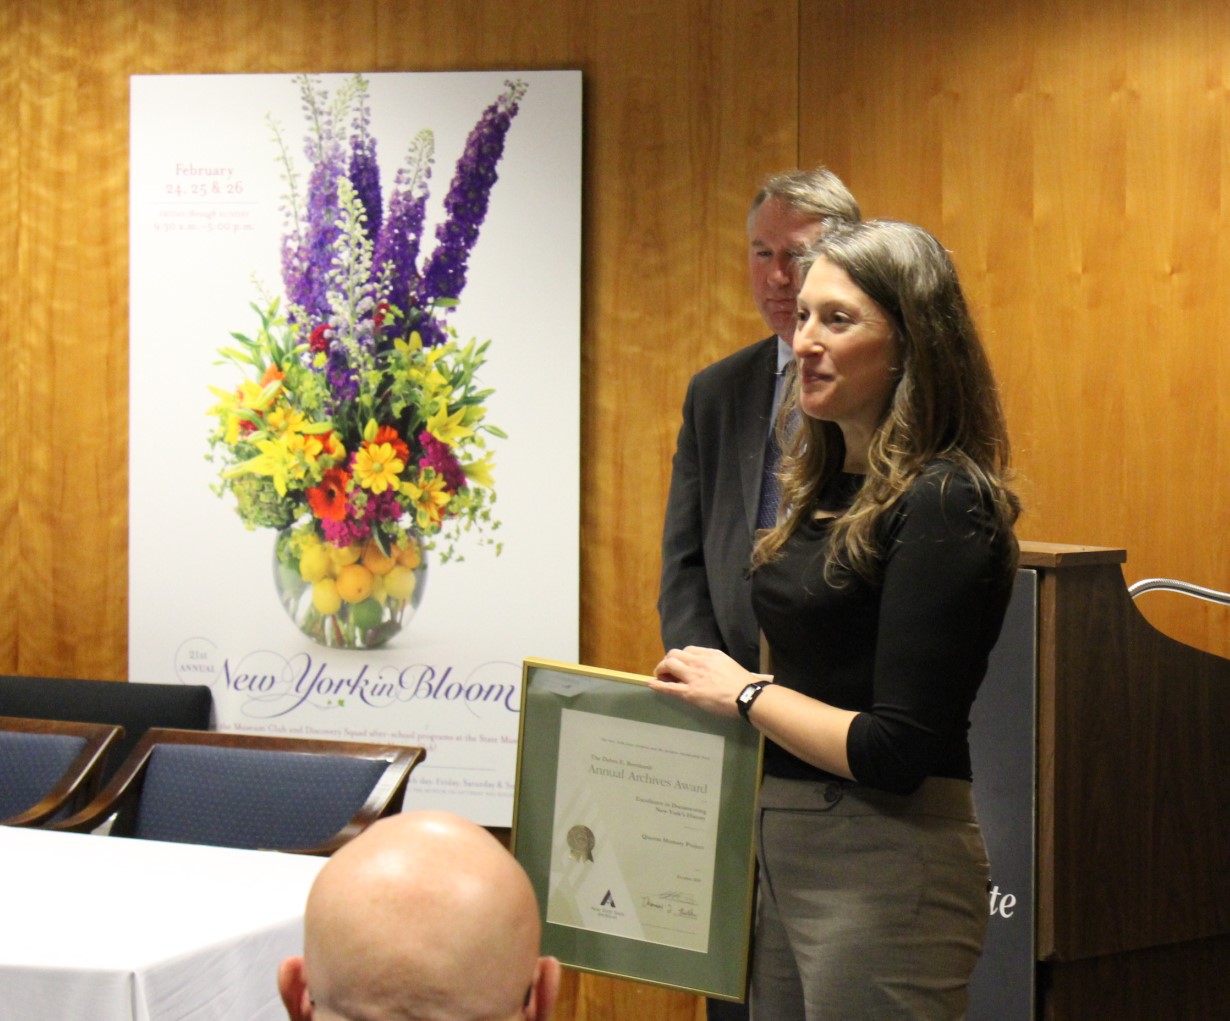 Queens Memory Project Director Natalie Milbrodt receiving the 2019 Debra E. Bernhardt Annual Archives Award for Excellence in Documenting New York’s History.